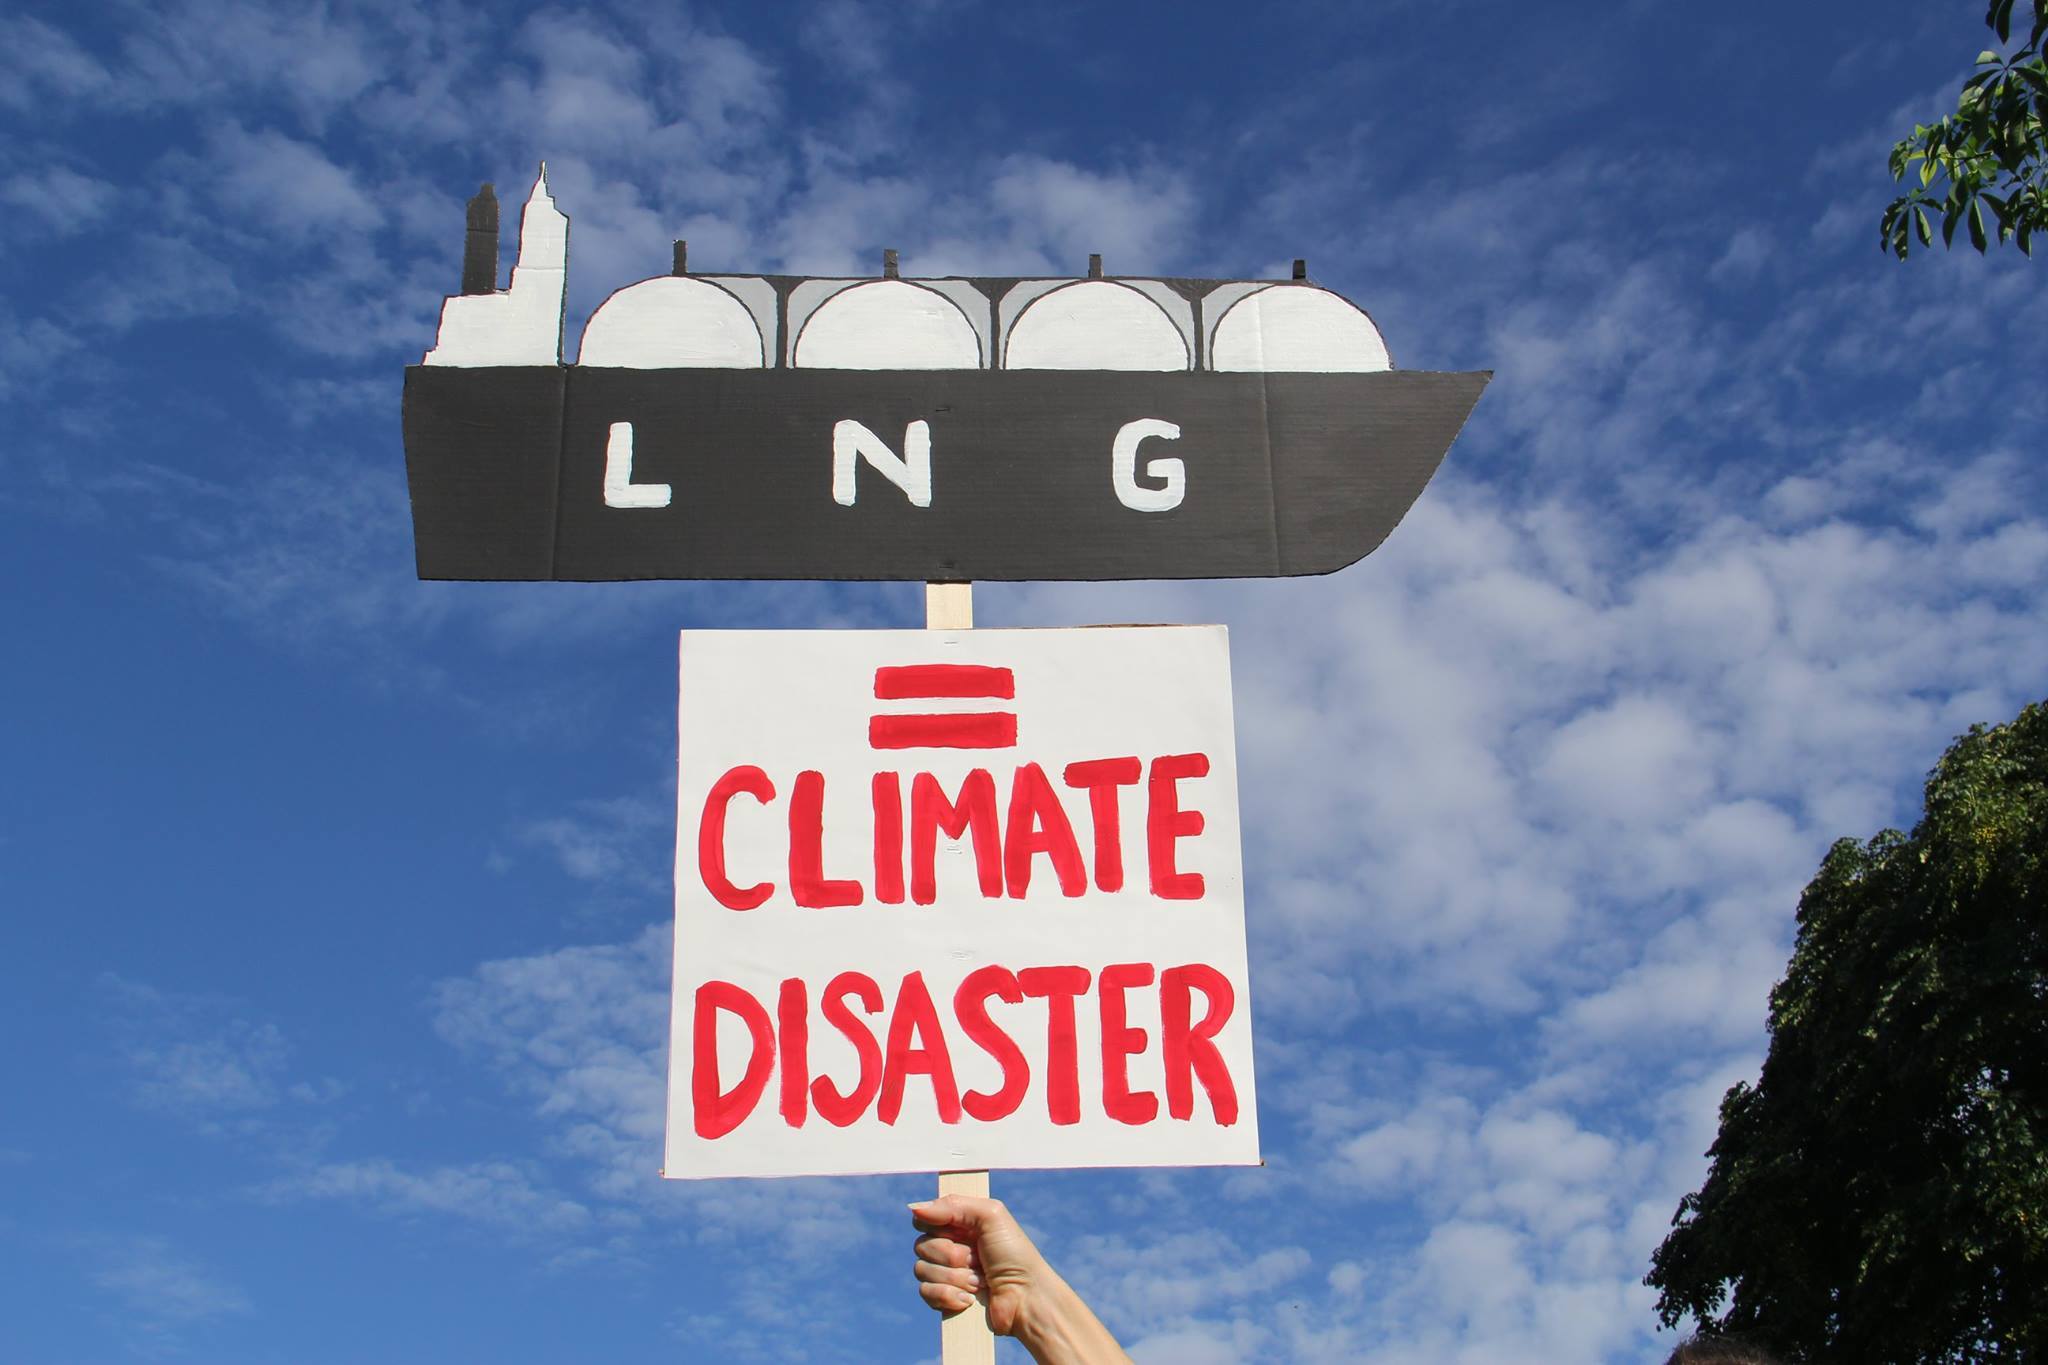 LNG Climate Disaster